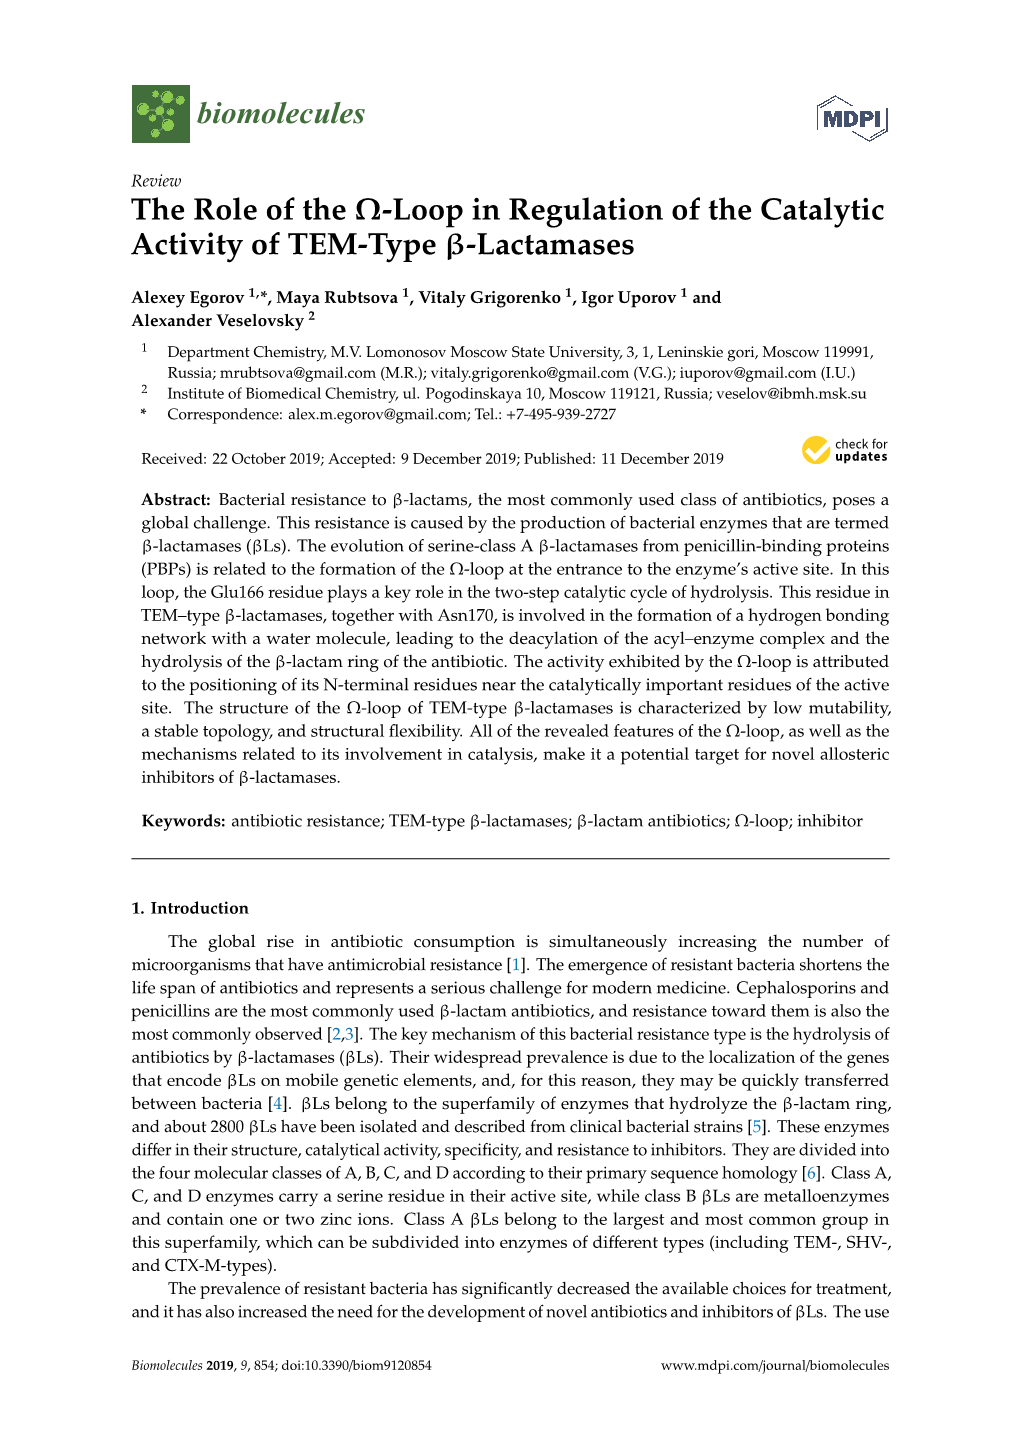 The Role of the O-Loop in Regulation of the Catalytic Activity of TEM-Type Β-Lactamases